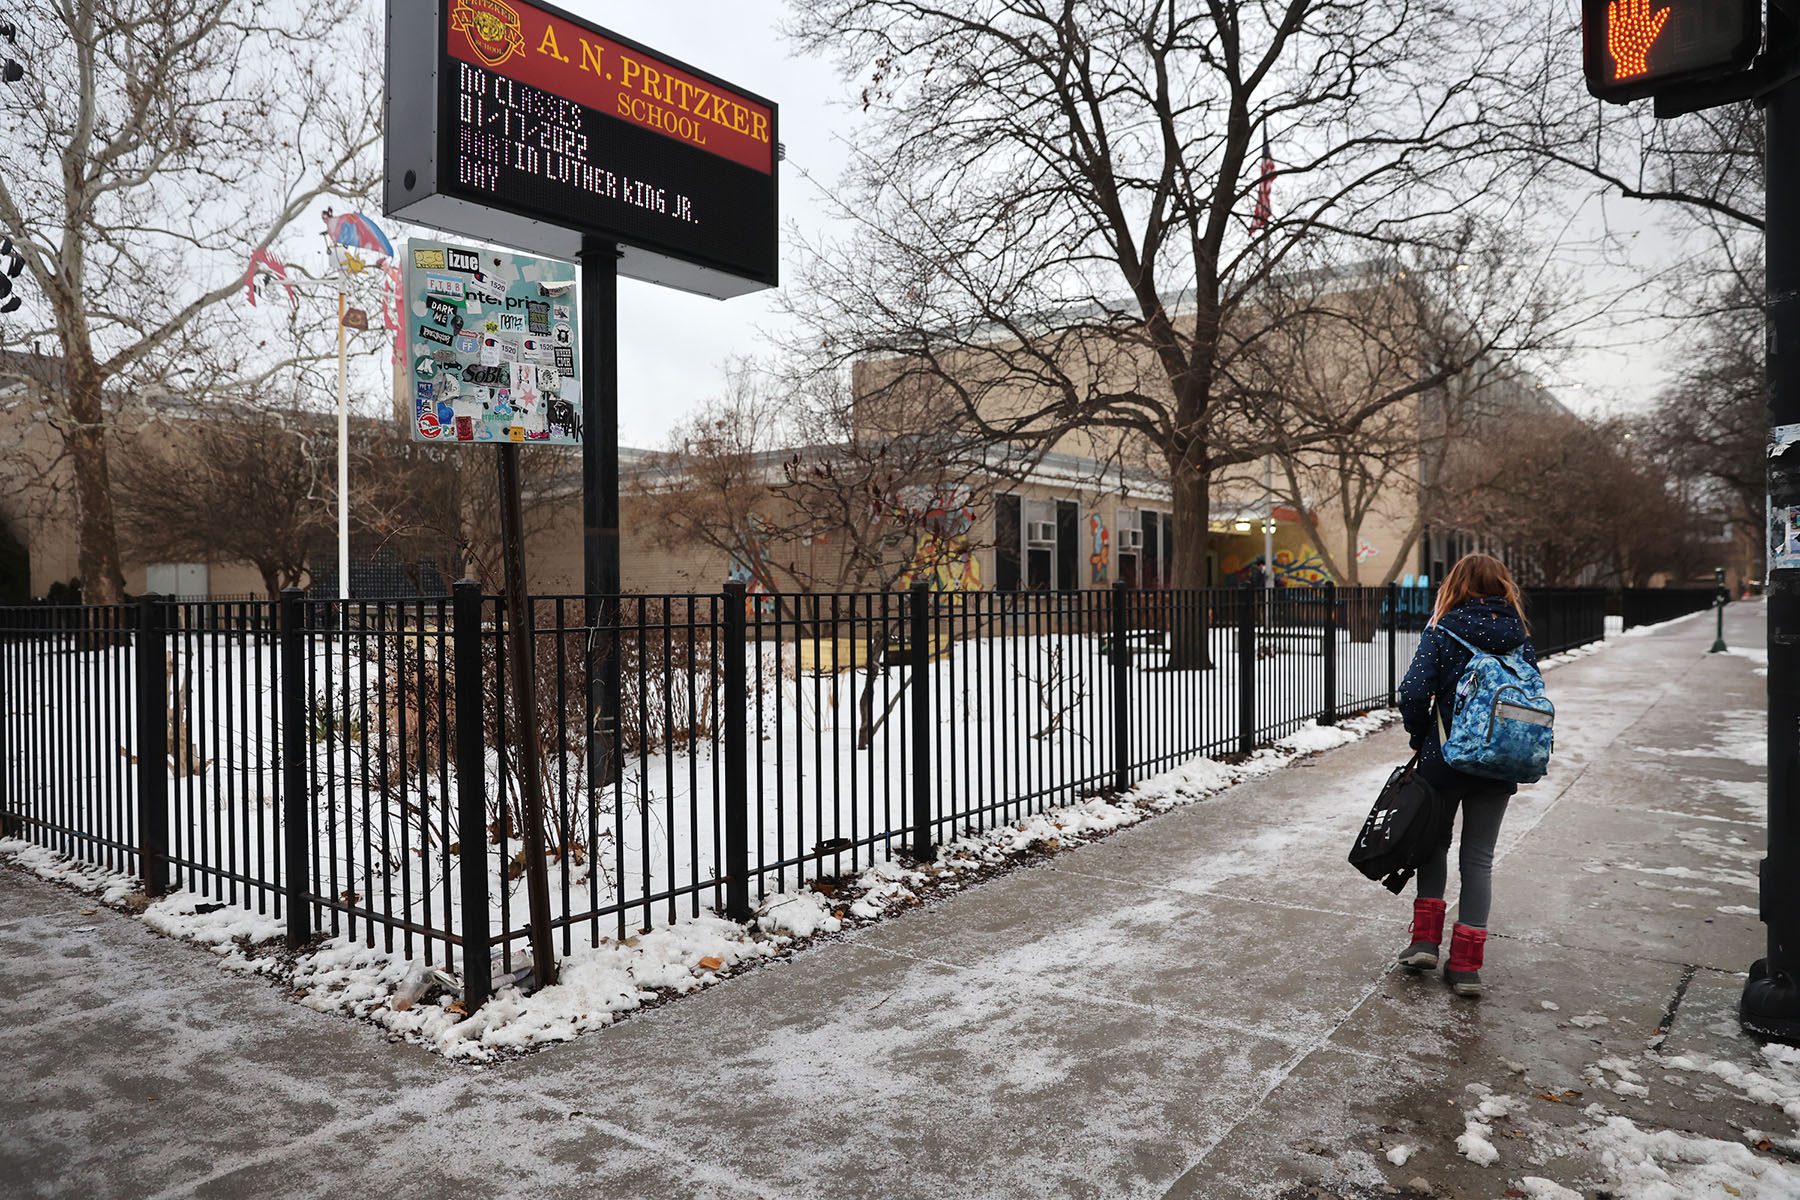 A student walks towards her school in the snow.